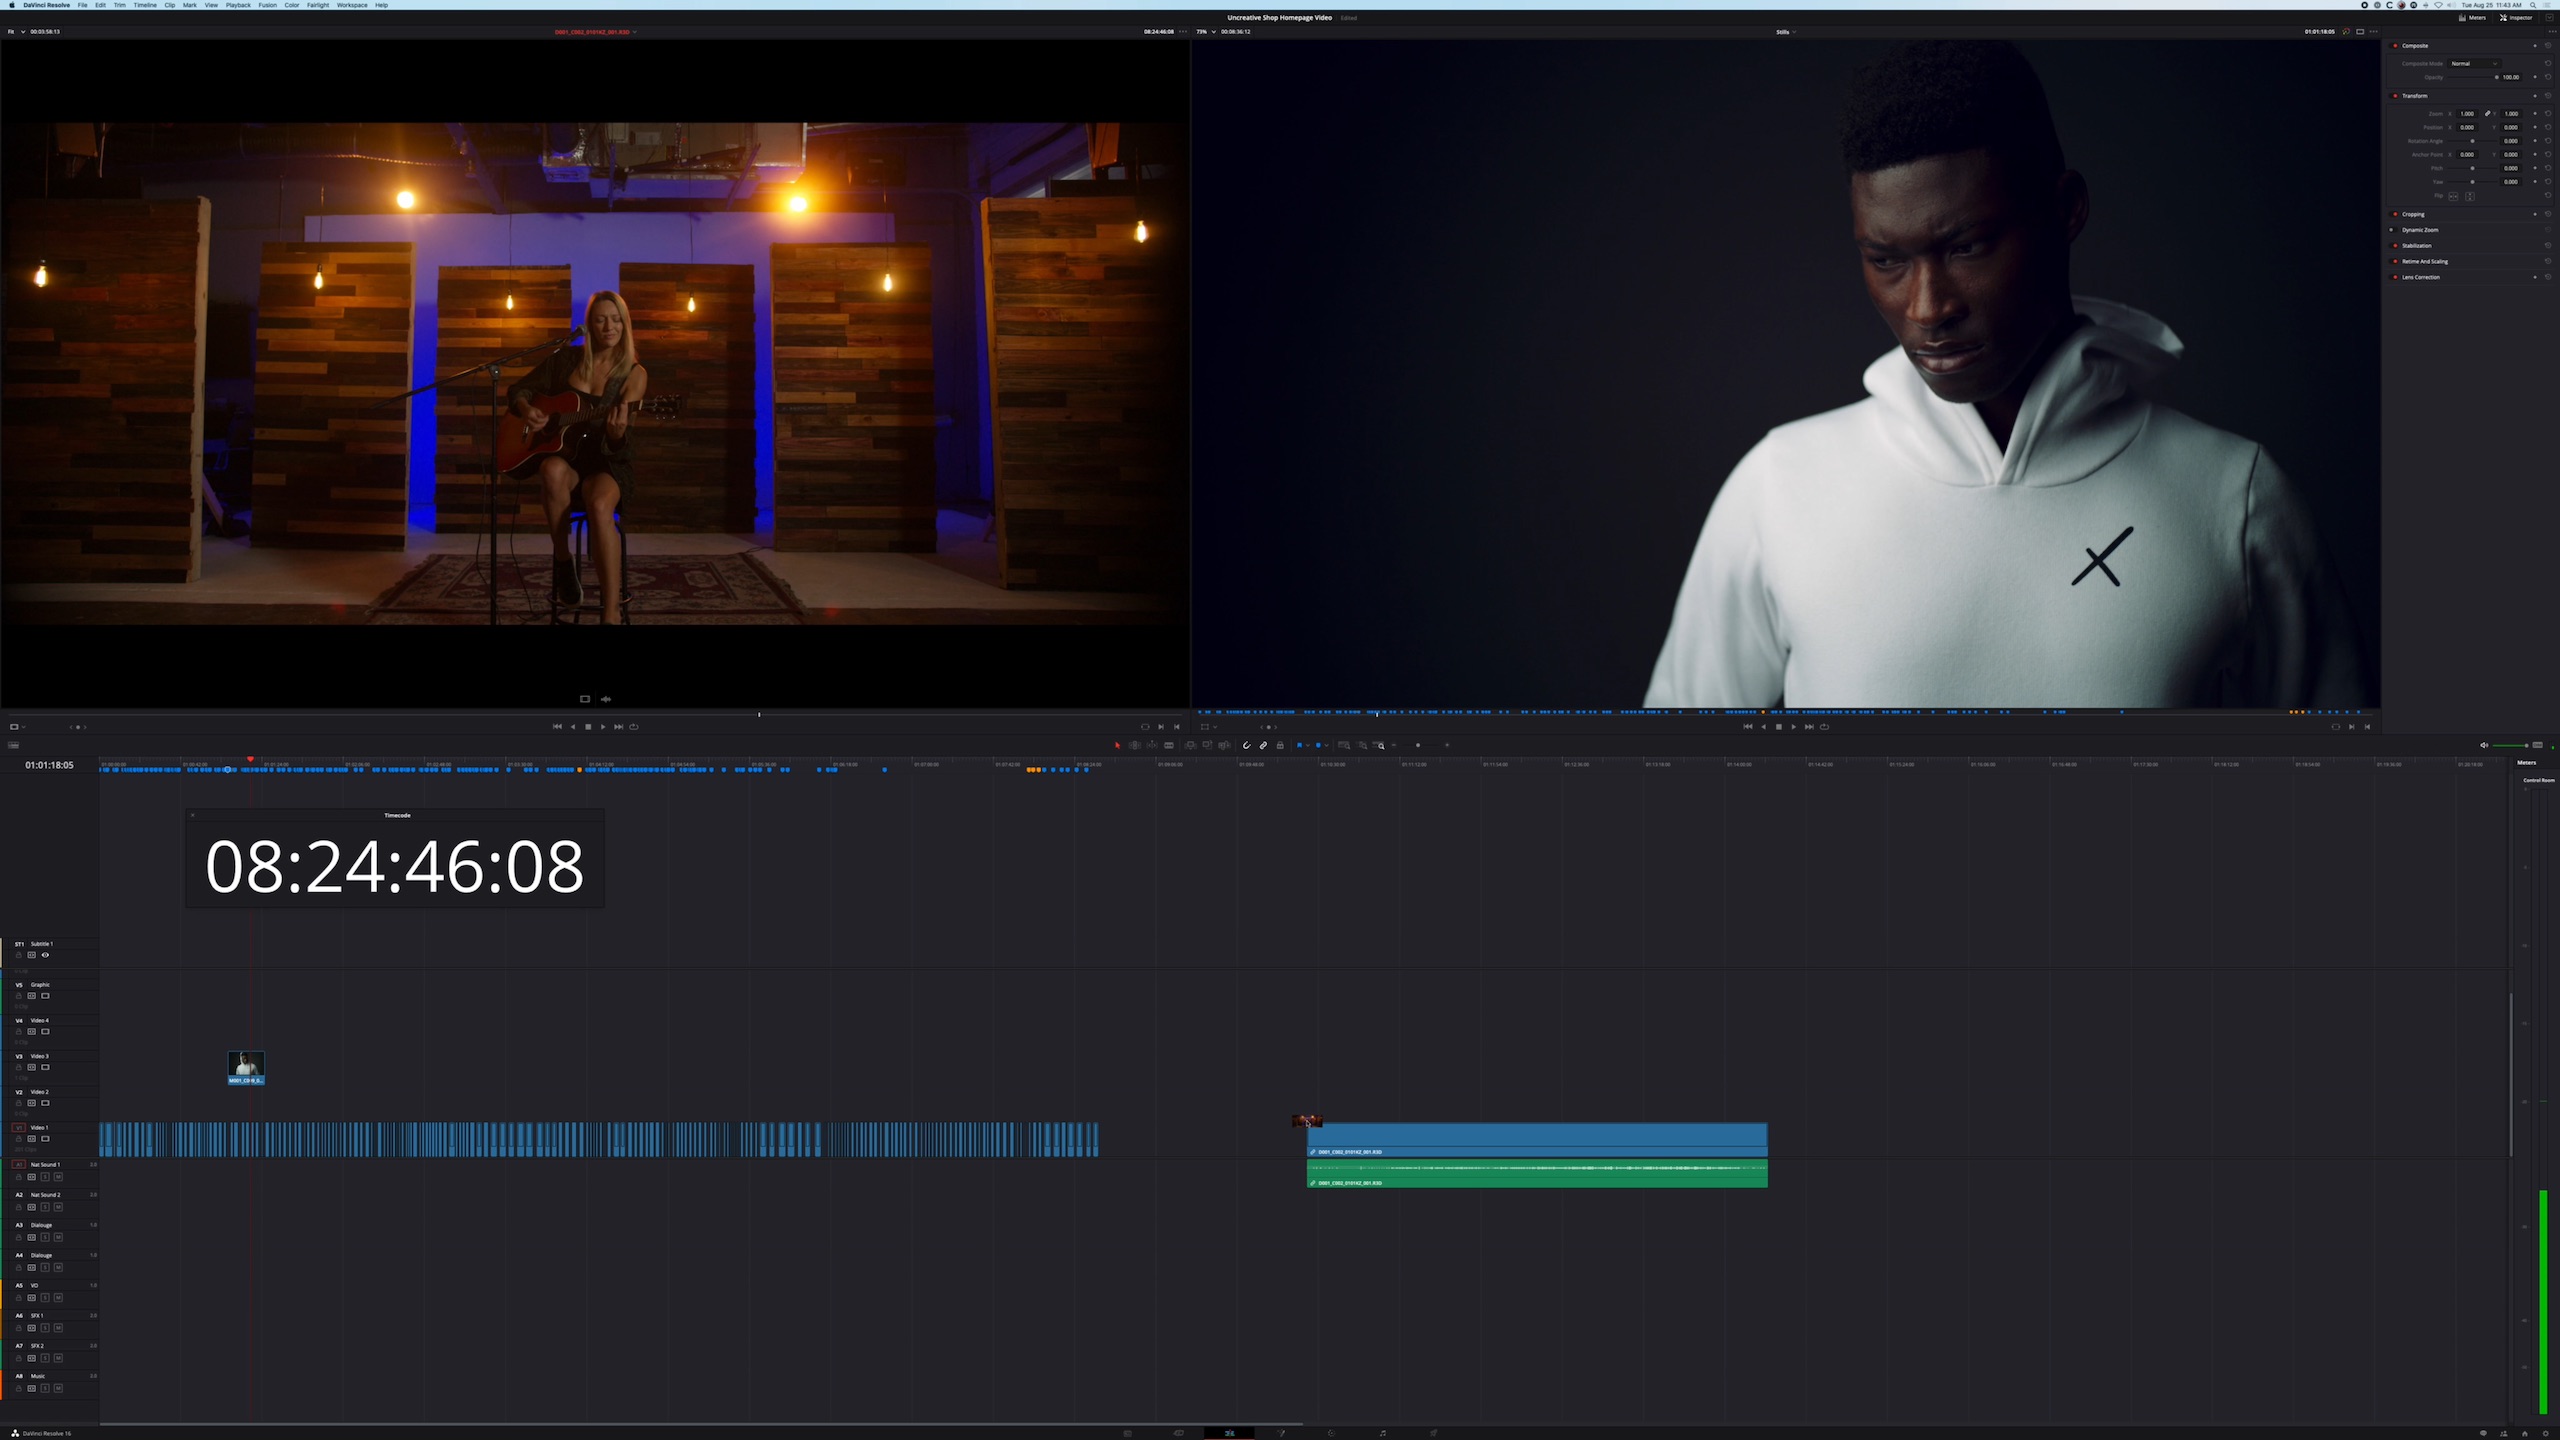 BlackMagic Design Editfest 2020 with screenshot of editing software on computer